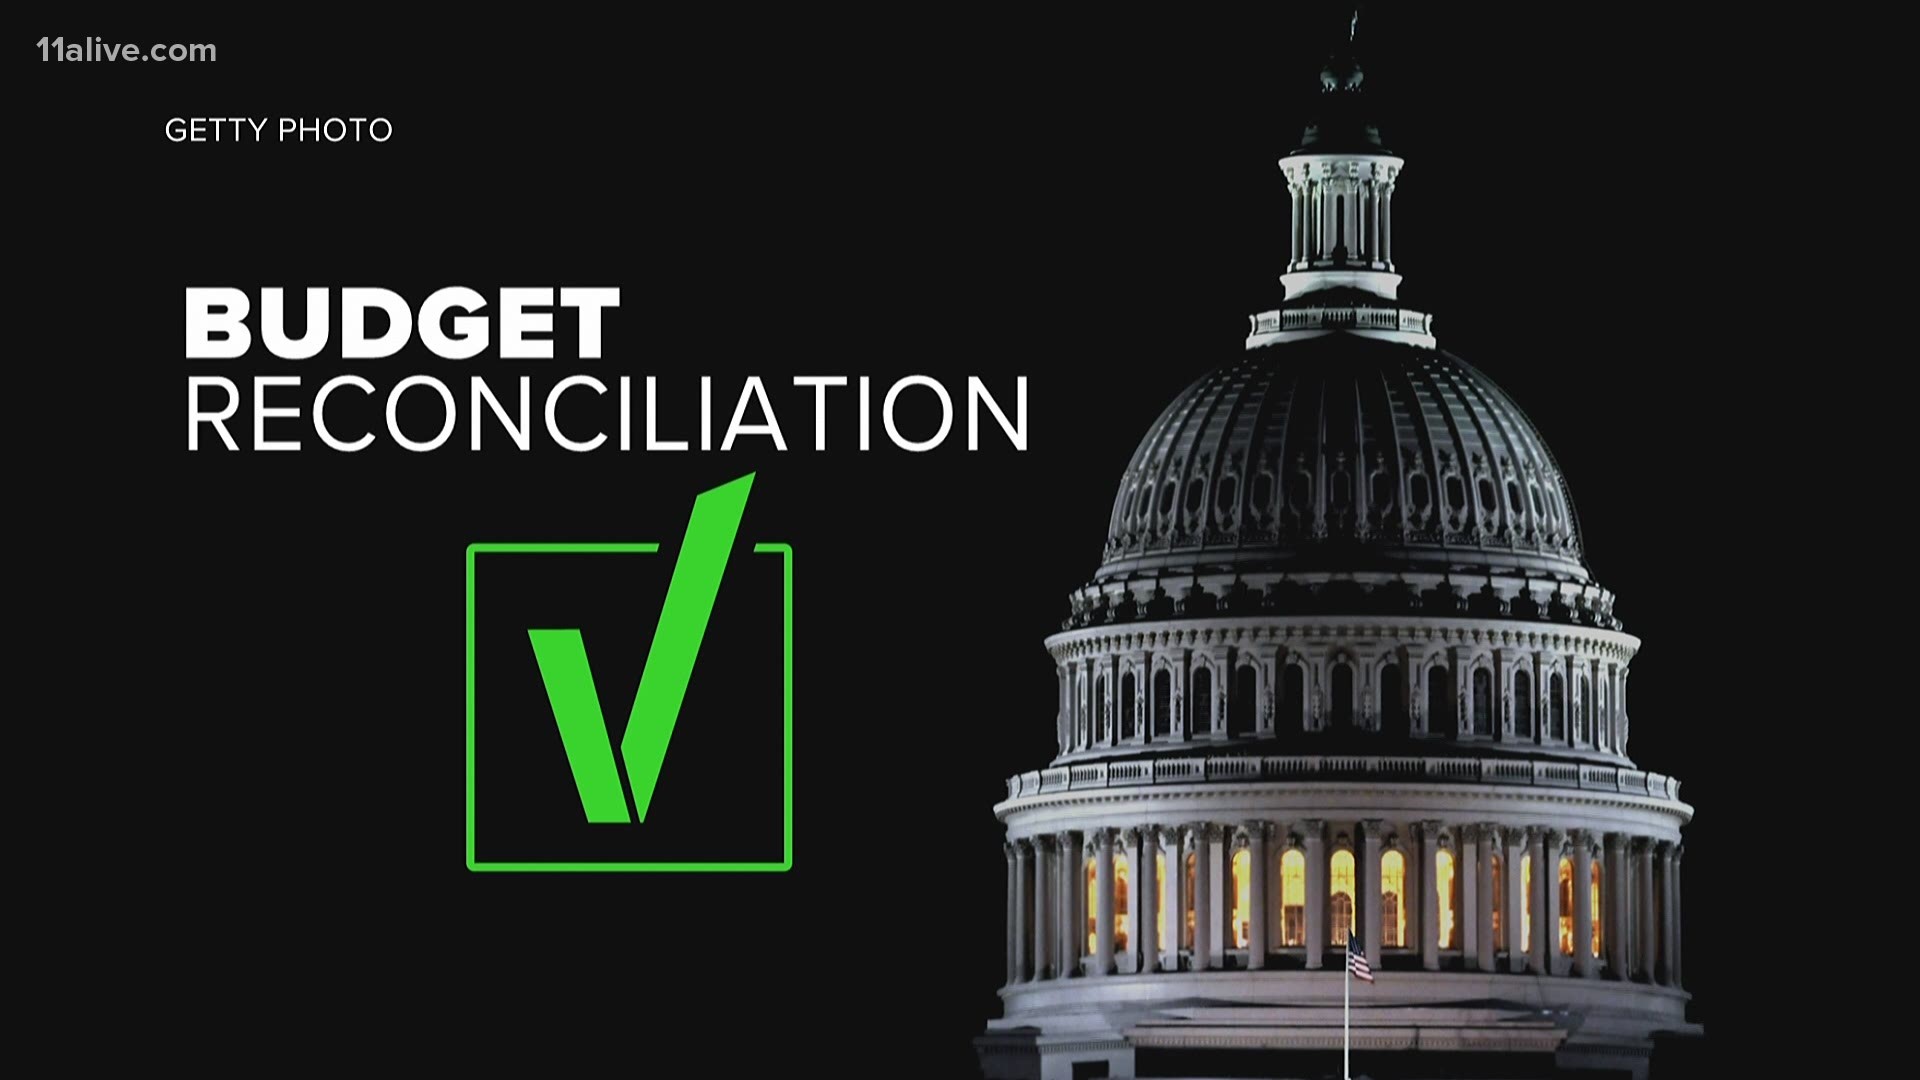 As president Biden and Congressional Democrats push for the COVID-19 relief bill, there's been a lot of talk about budget reconciliation. What is it?